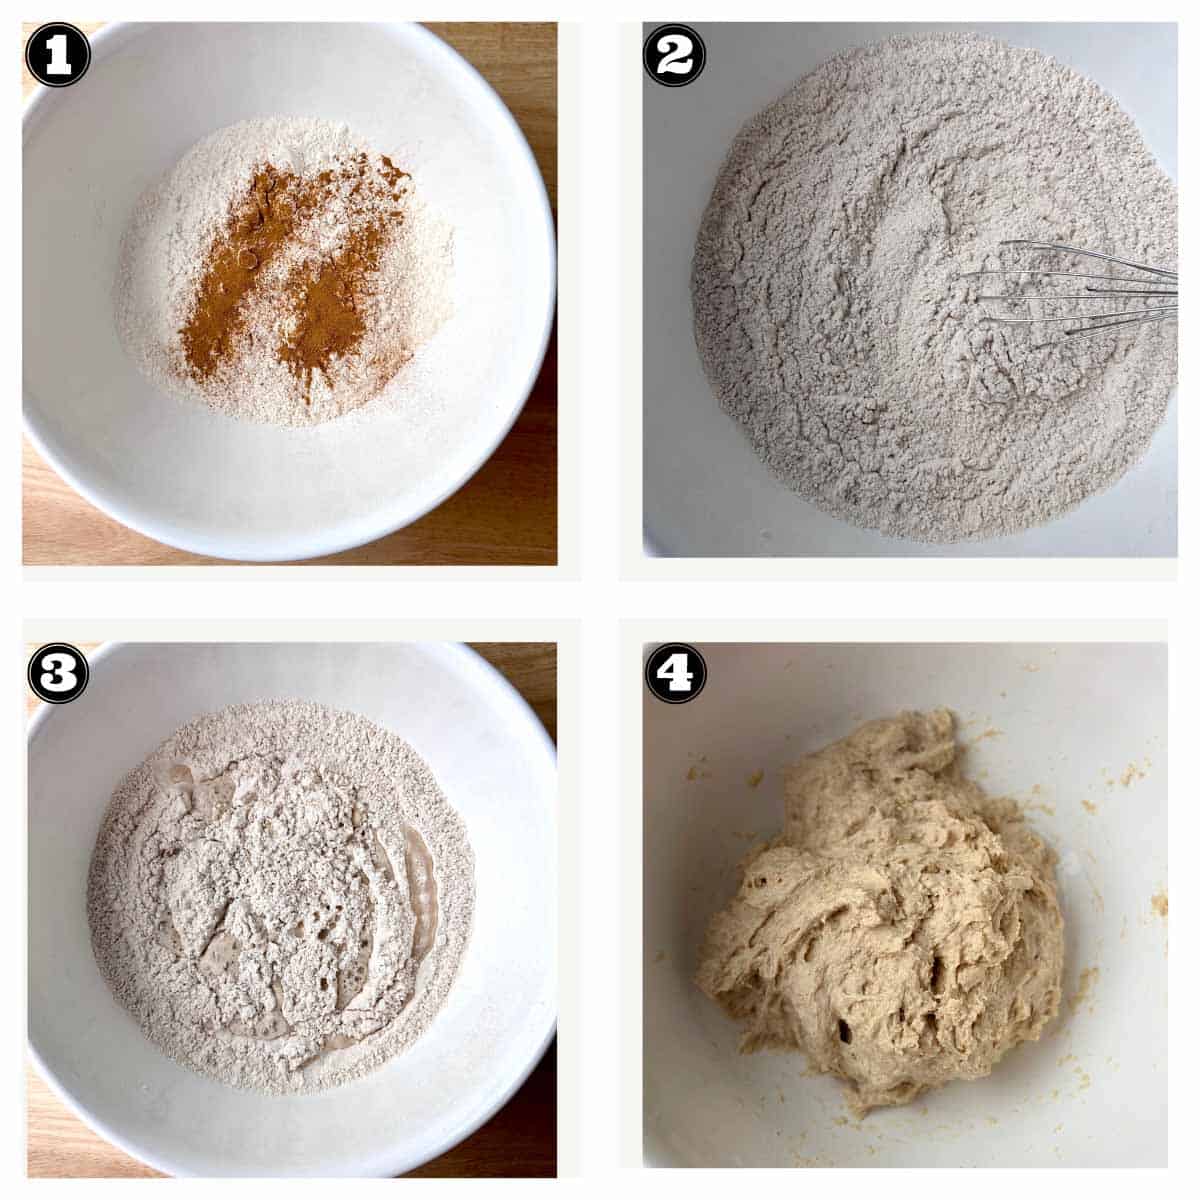 images showing steps for combining wet and dry ingredients making the dough